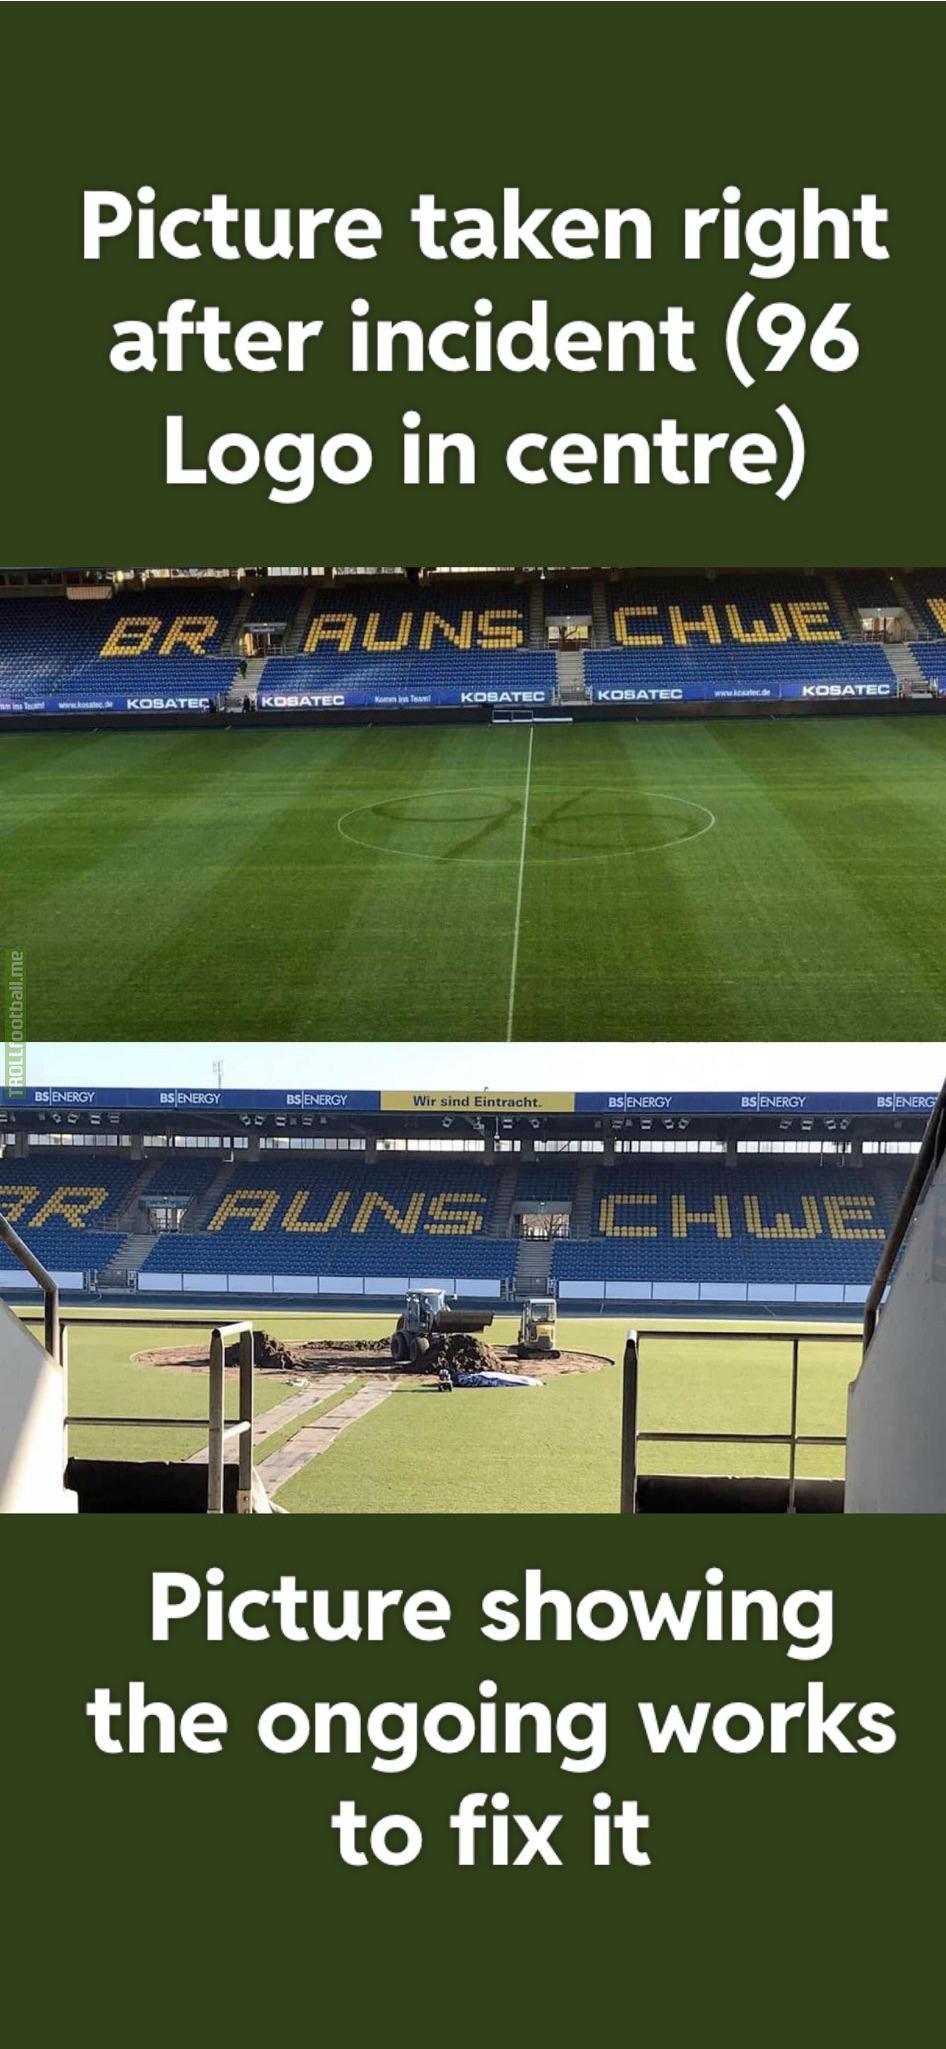 The pitch caring team of Eintracht Braunschweig chose a pretty radical solution to the provocative lawn marking of Hannover 96 fans